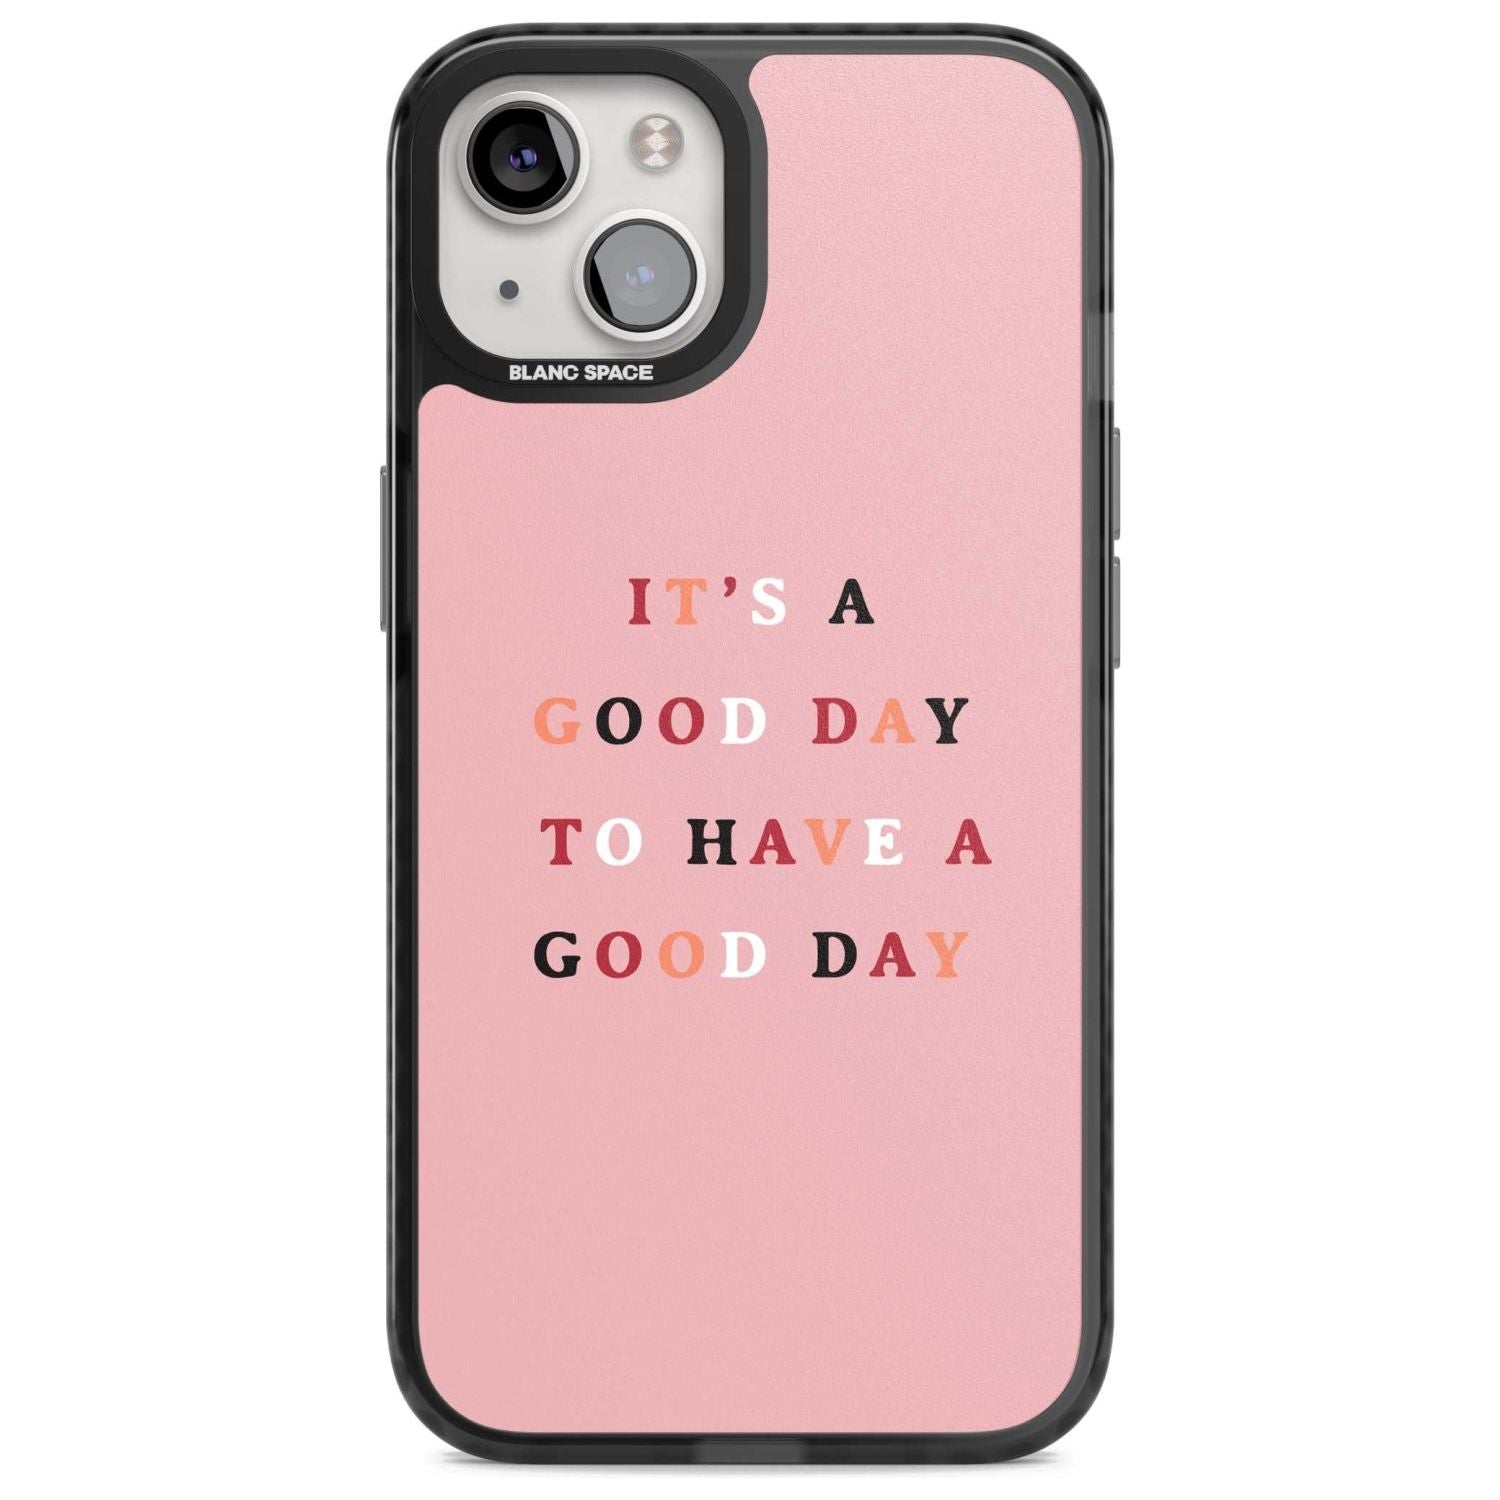 It's a good day to have a good day Phone Case iPhone 15 Plus / Magsafe Black Impact Case,iPhone 15 / Magsafe Black Impact Case,iPhone 14 Plus / Magsafe Black Impact Case,iPhone 14 / Magsafe Black Impact Case,iPhone 13 / Magsafe Black Impact Case Blanc Space